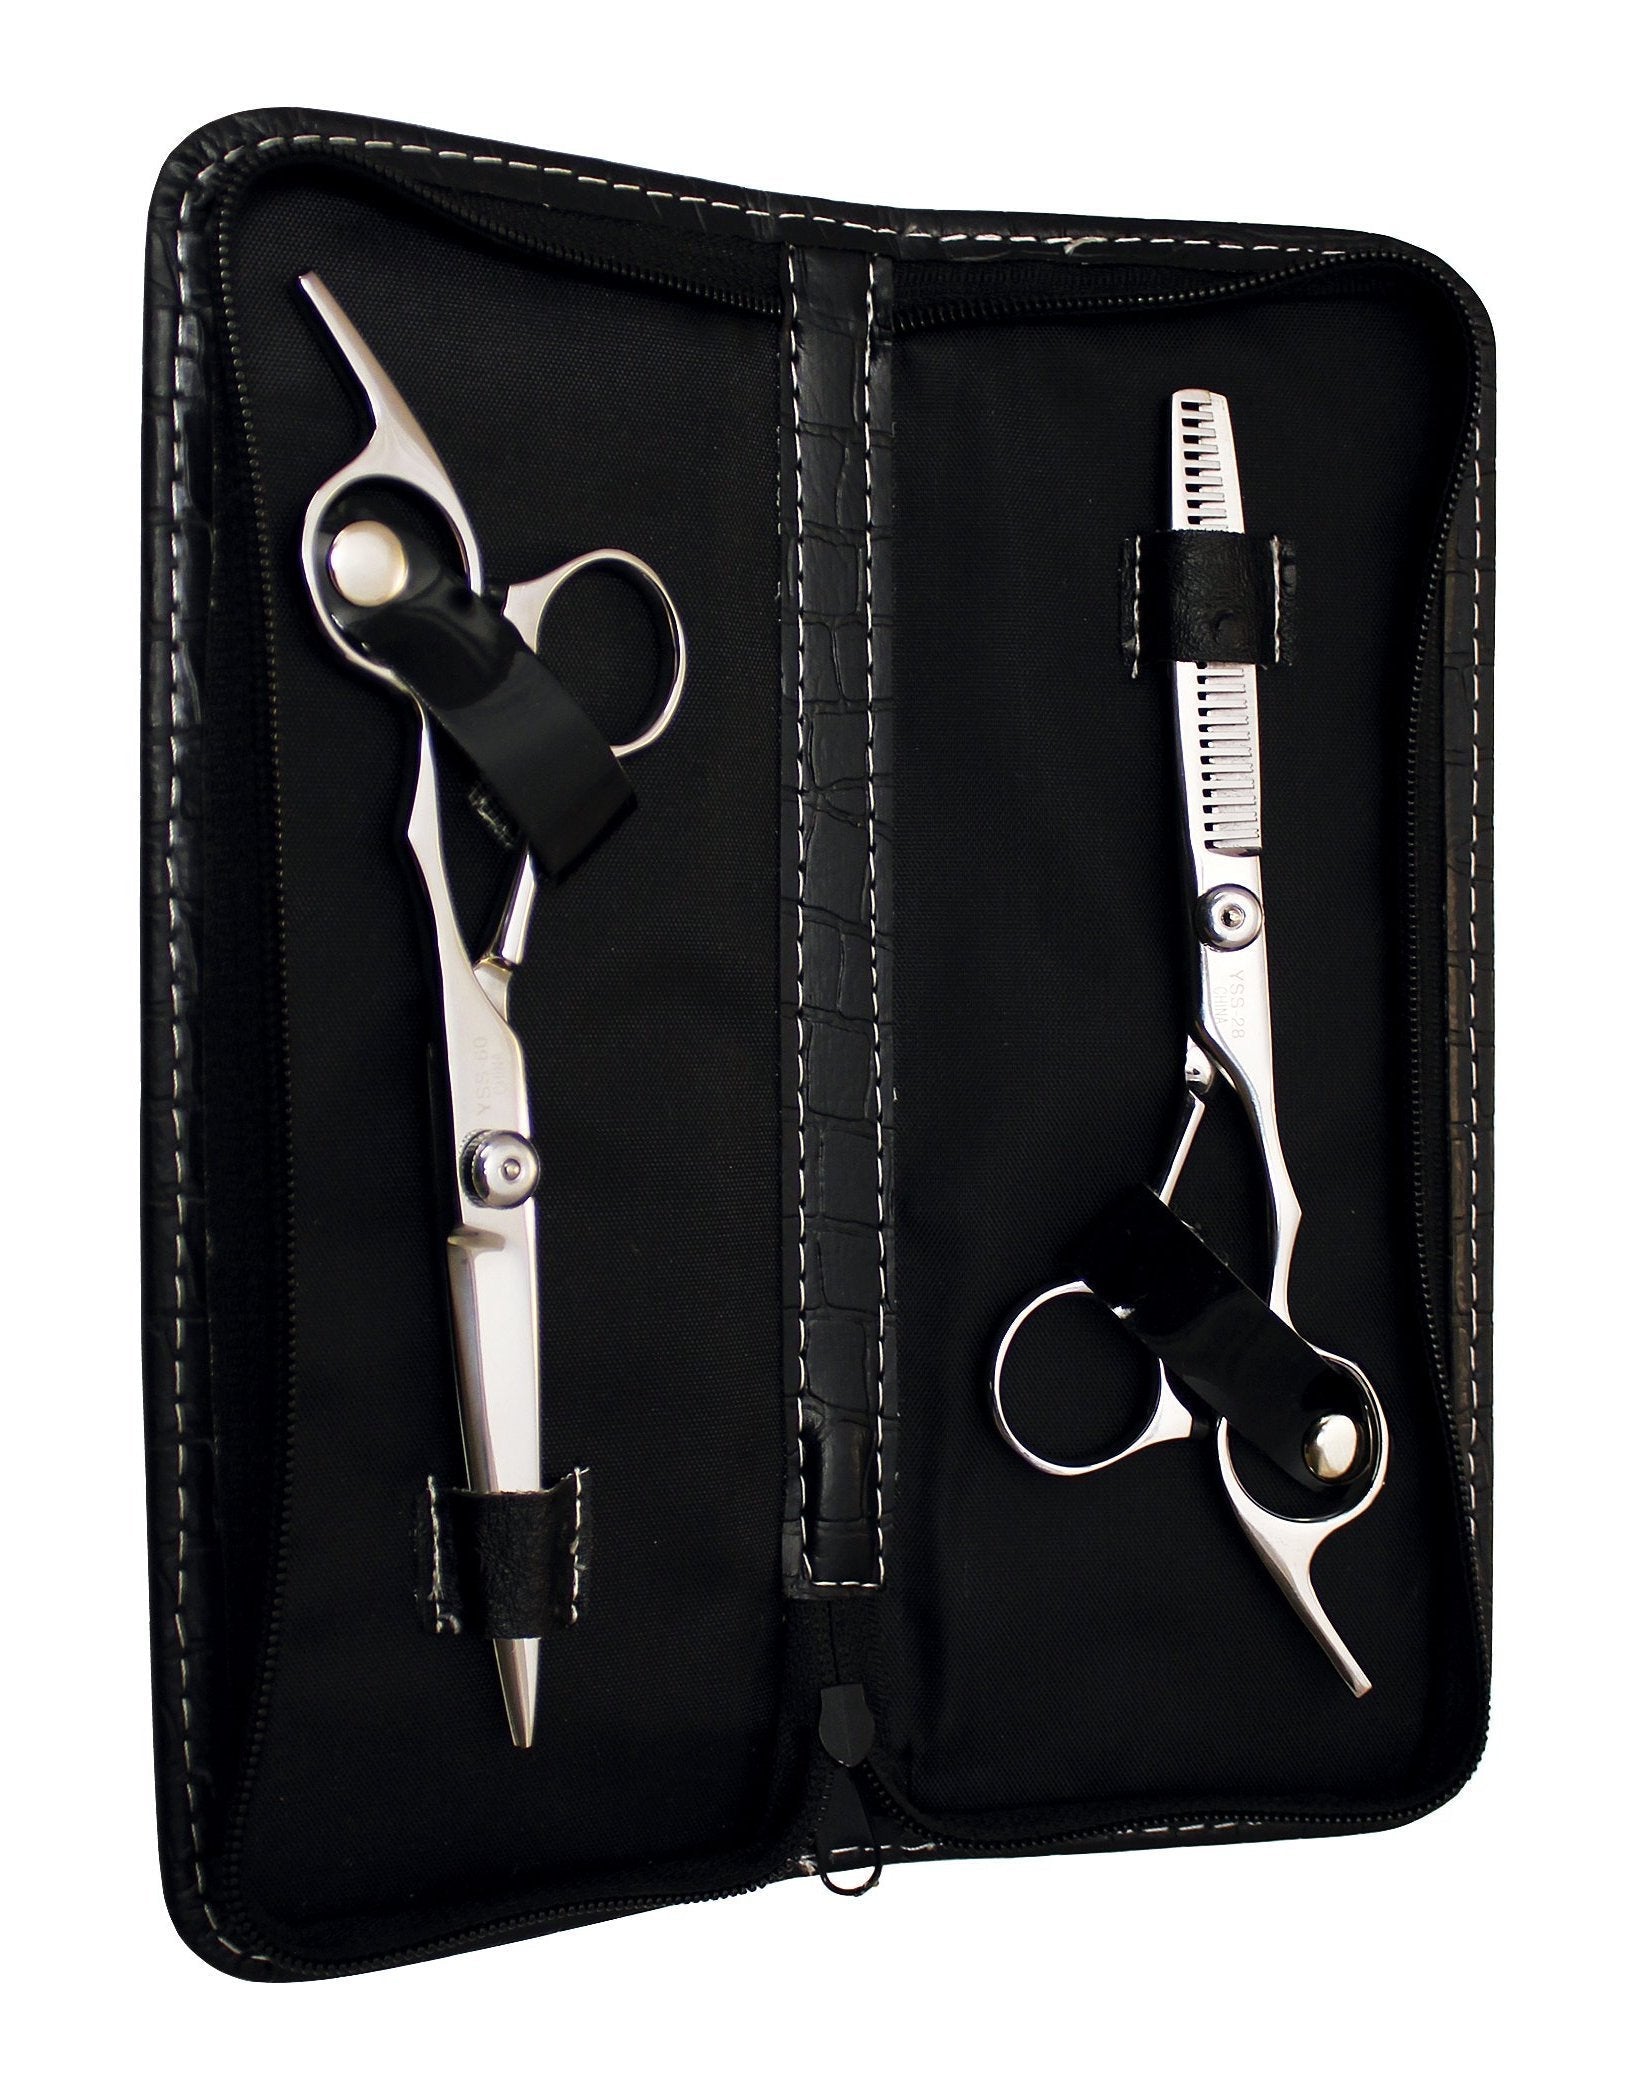 Academy Shears - Stainless Steel Shear Set with Case HairArt Int'l Inc.